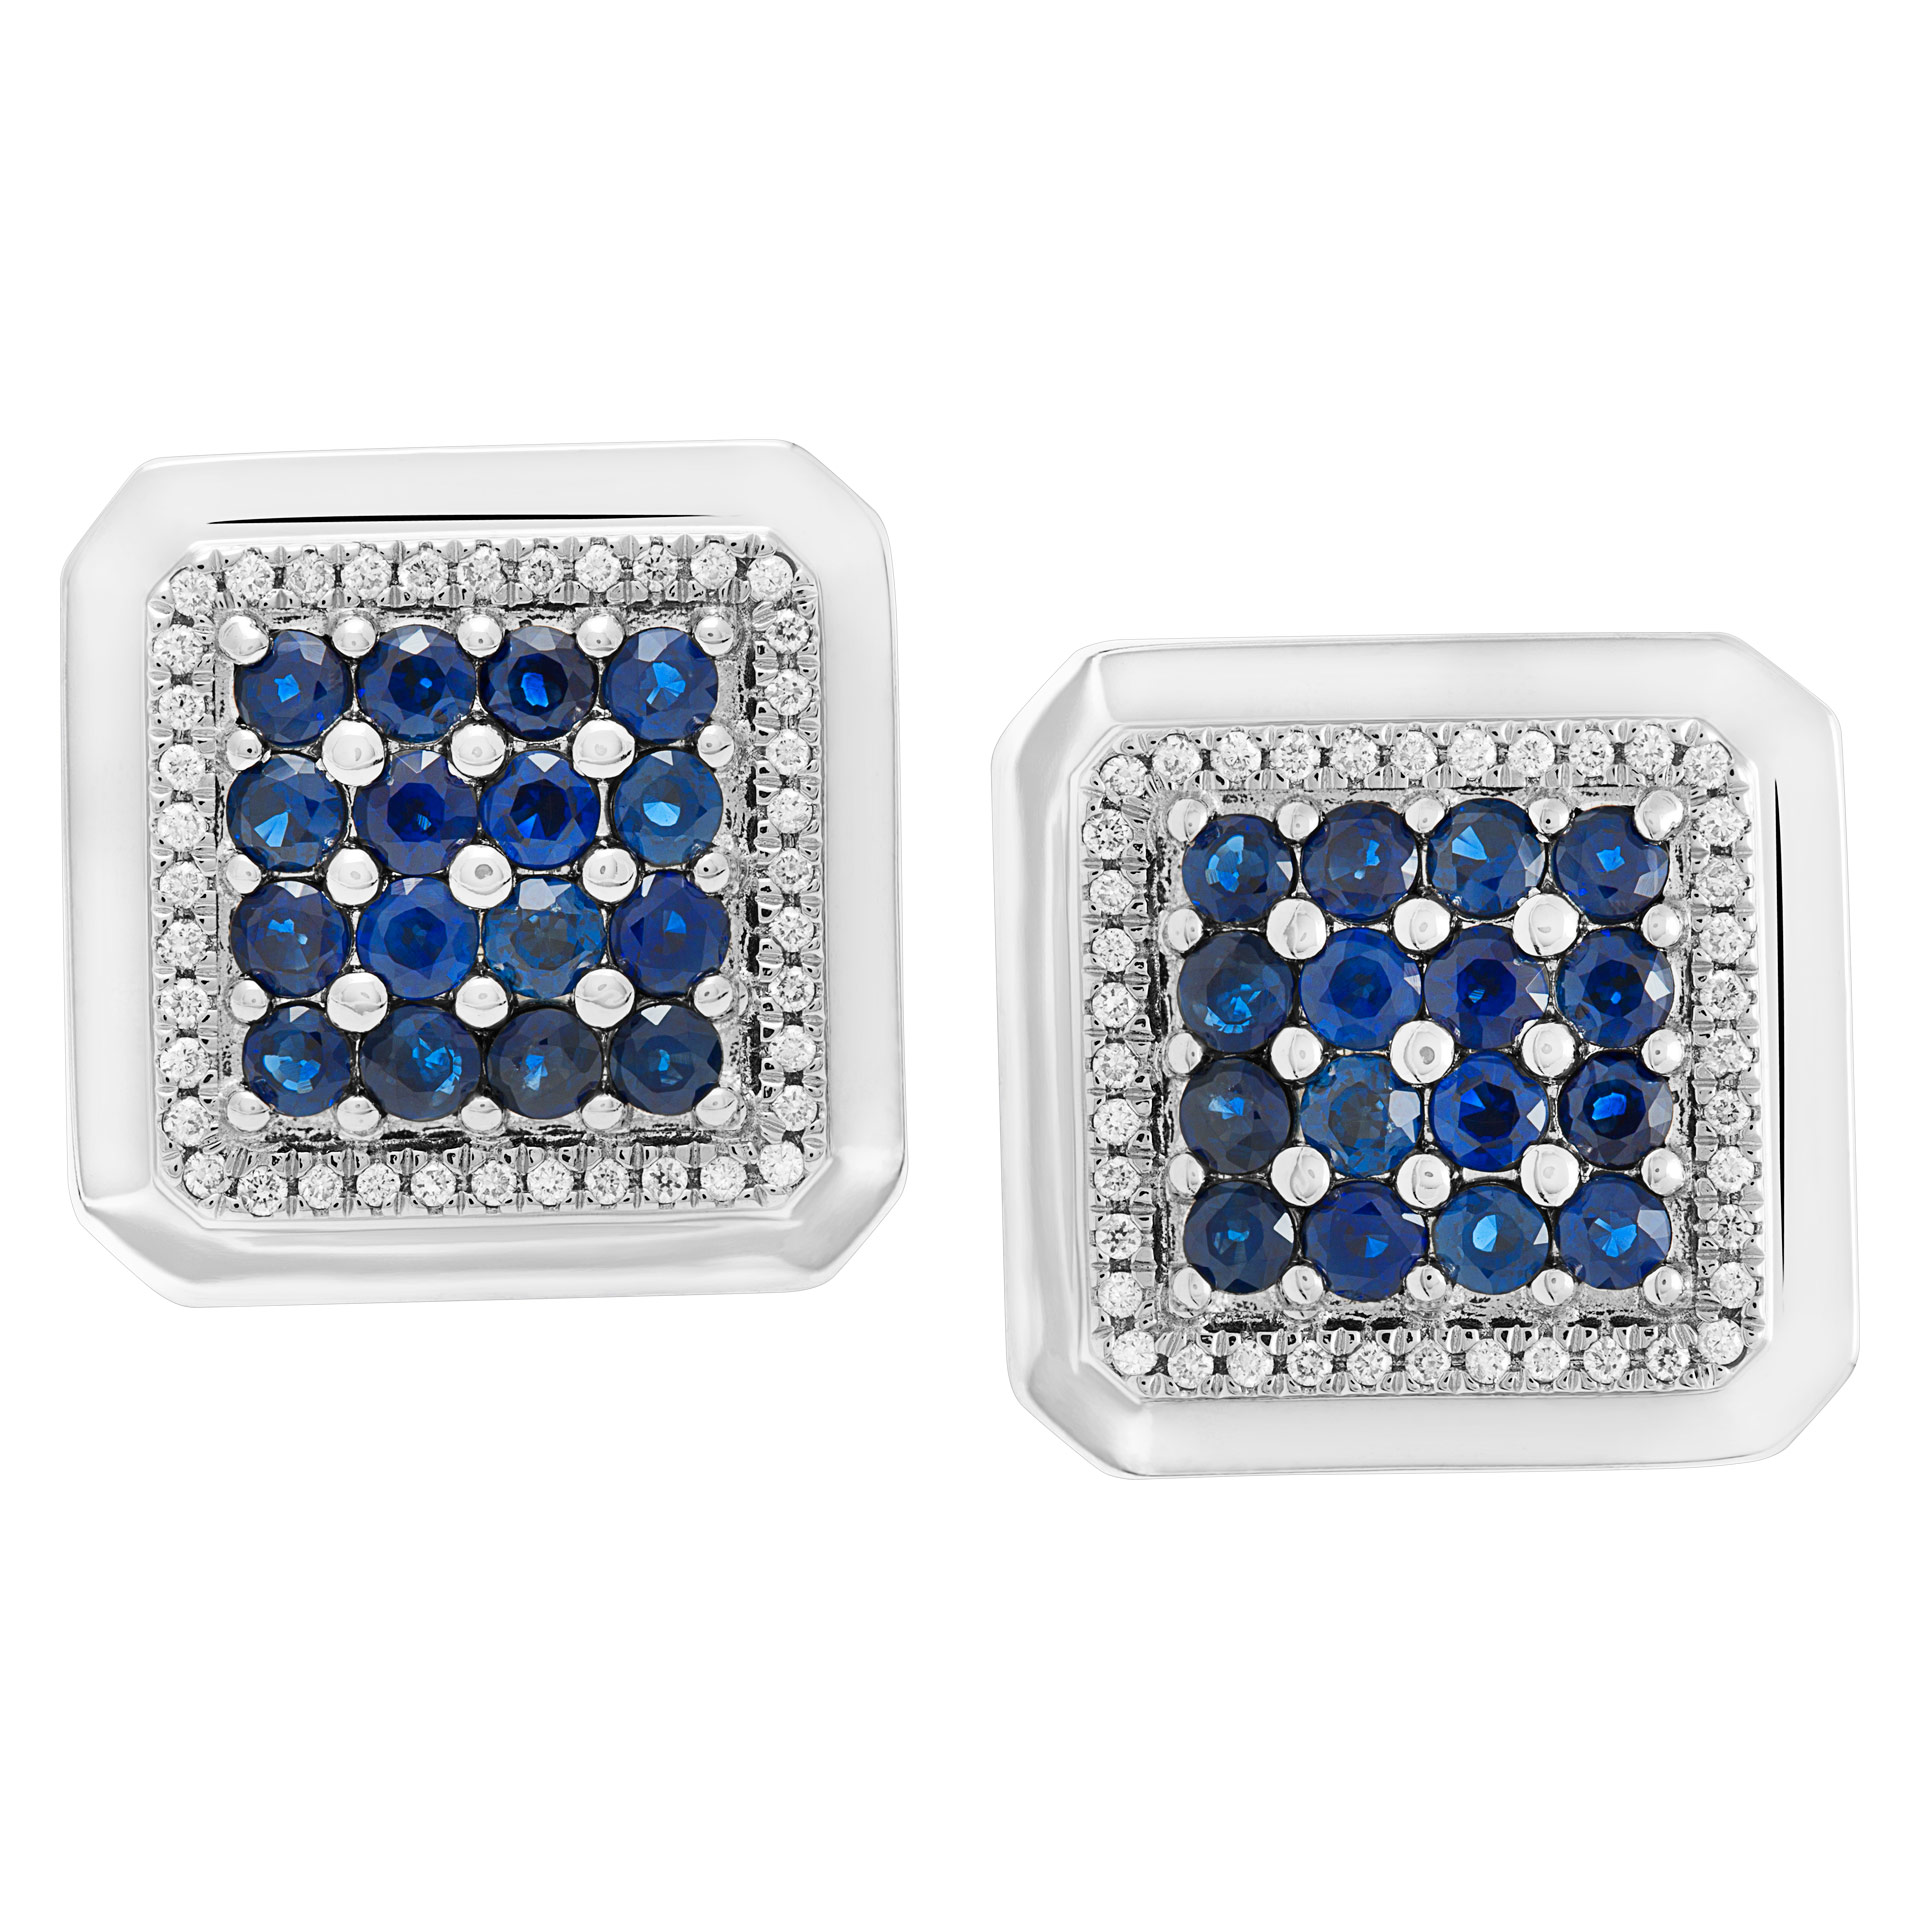 18k white gold cufflinks with diamonds and sapphires